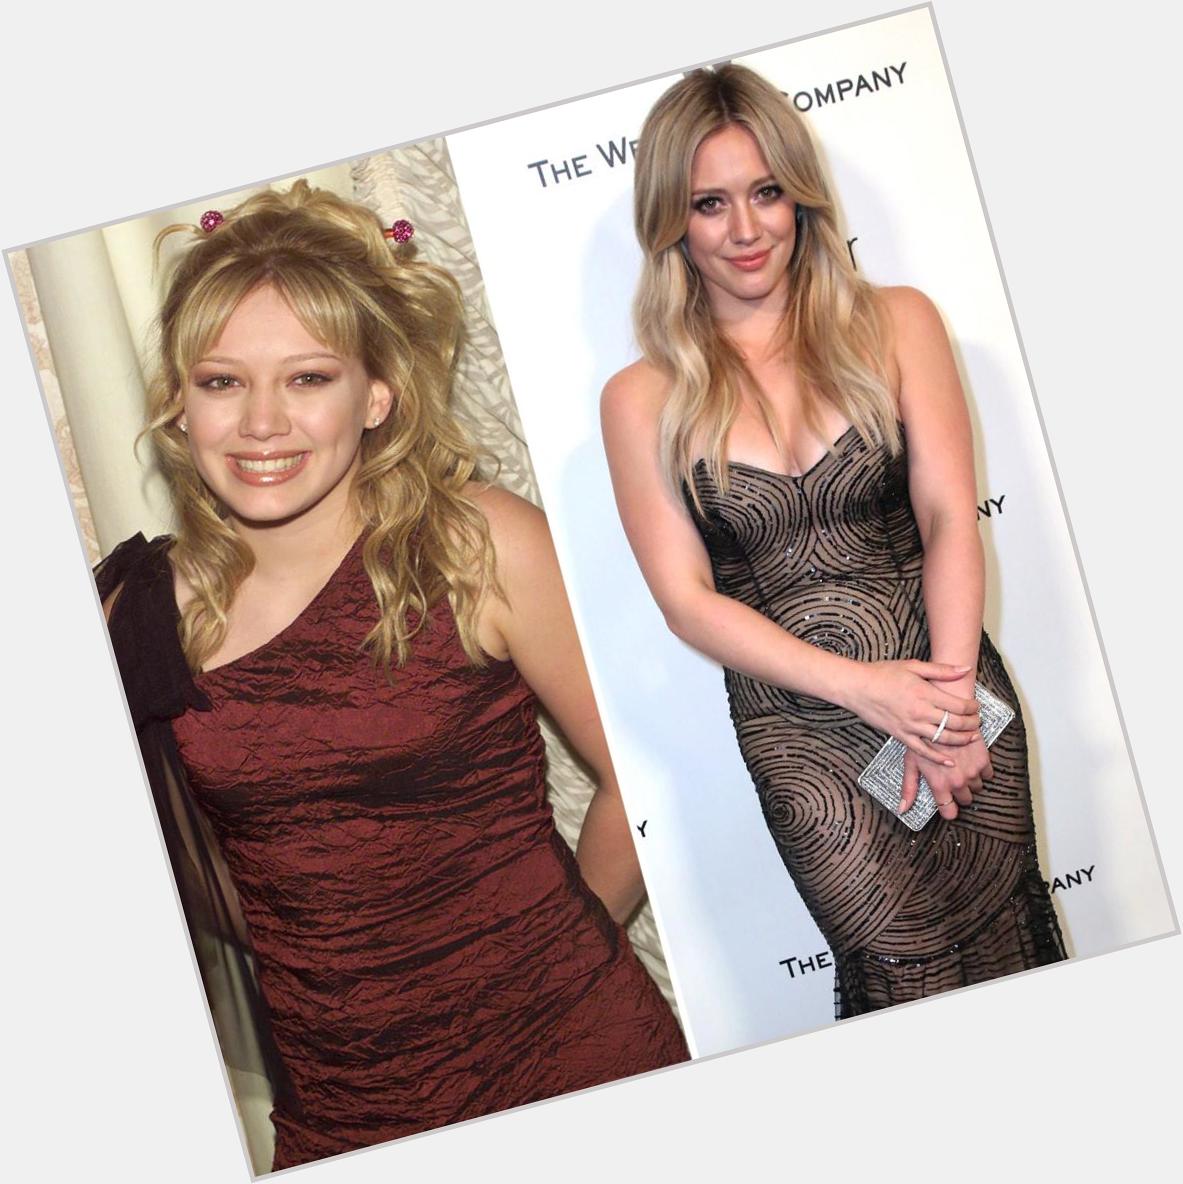 Happy Birthday Hilary Duff! The \"Lizzie McGuire\" star turns 28 today and boy has she changed!  